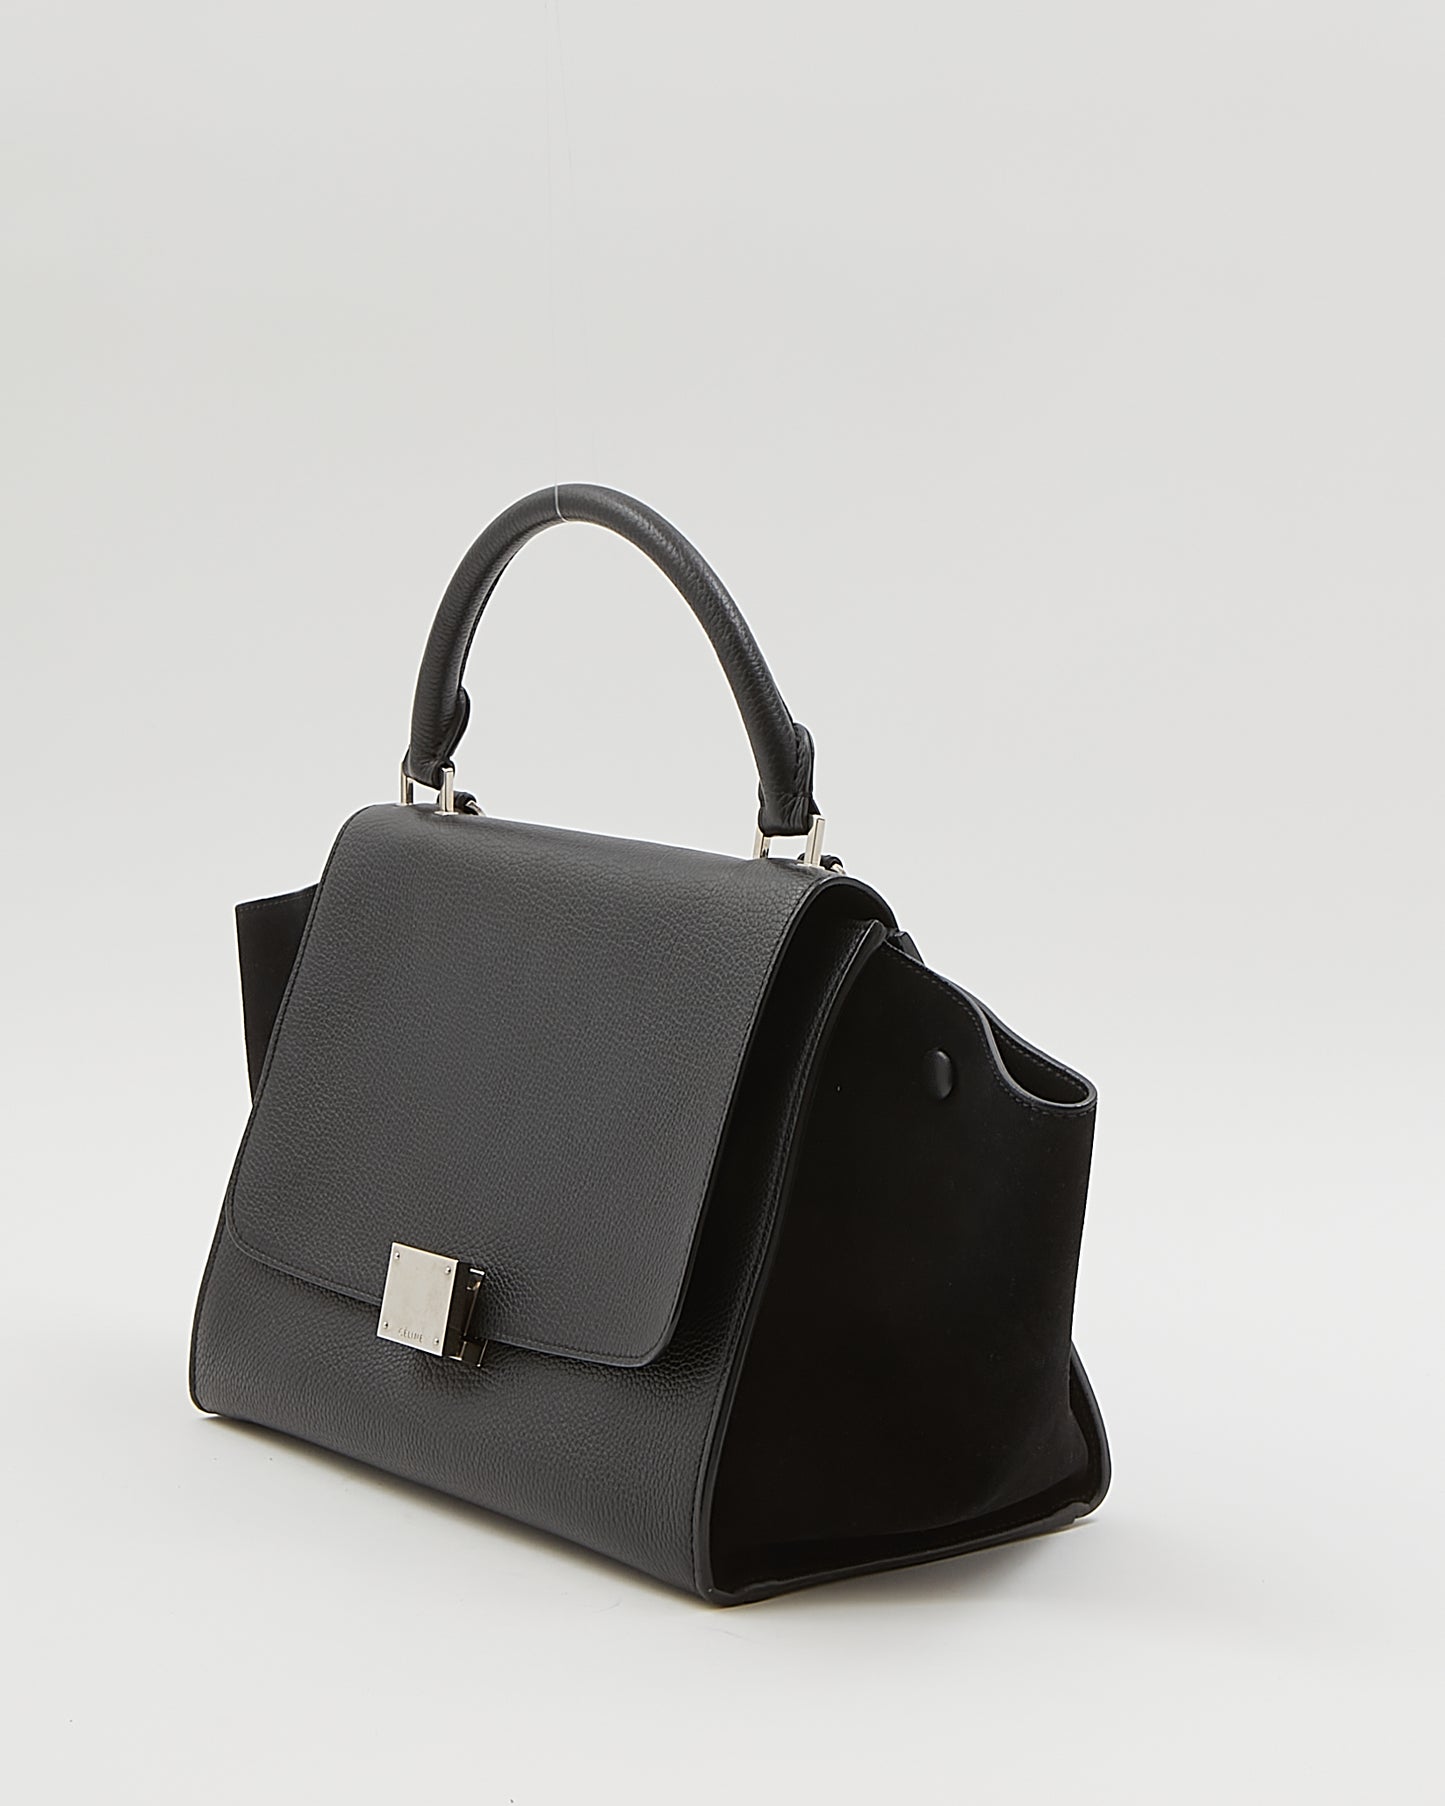 Celine Black Leather & Suede Small Trapeze Bag